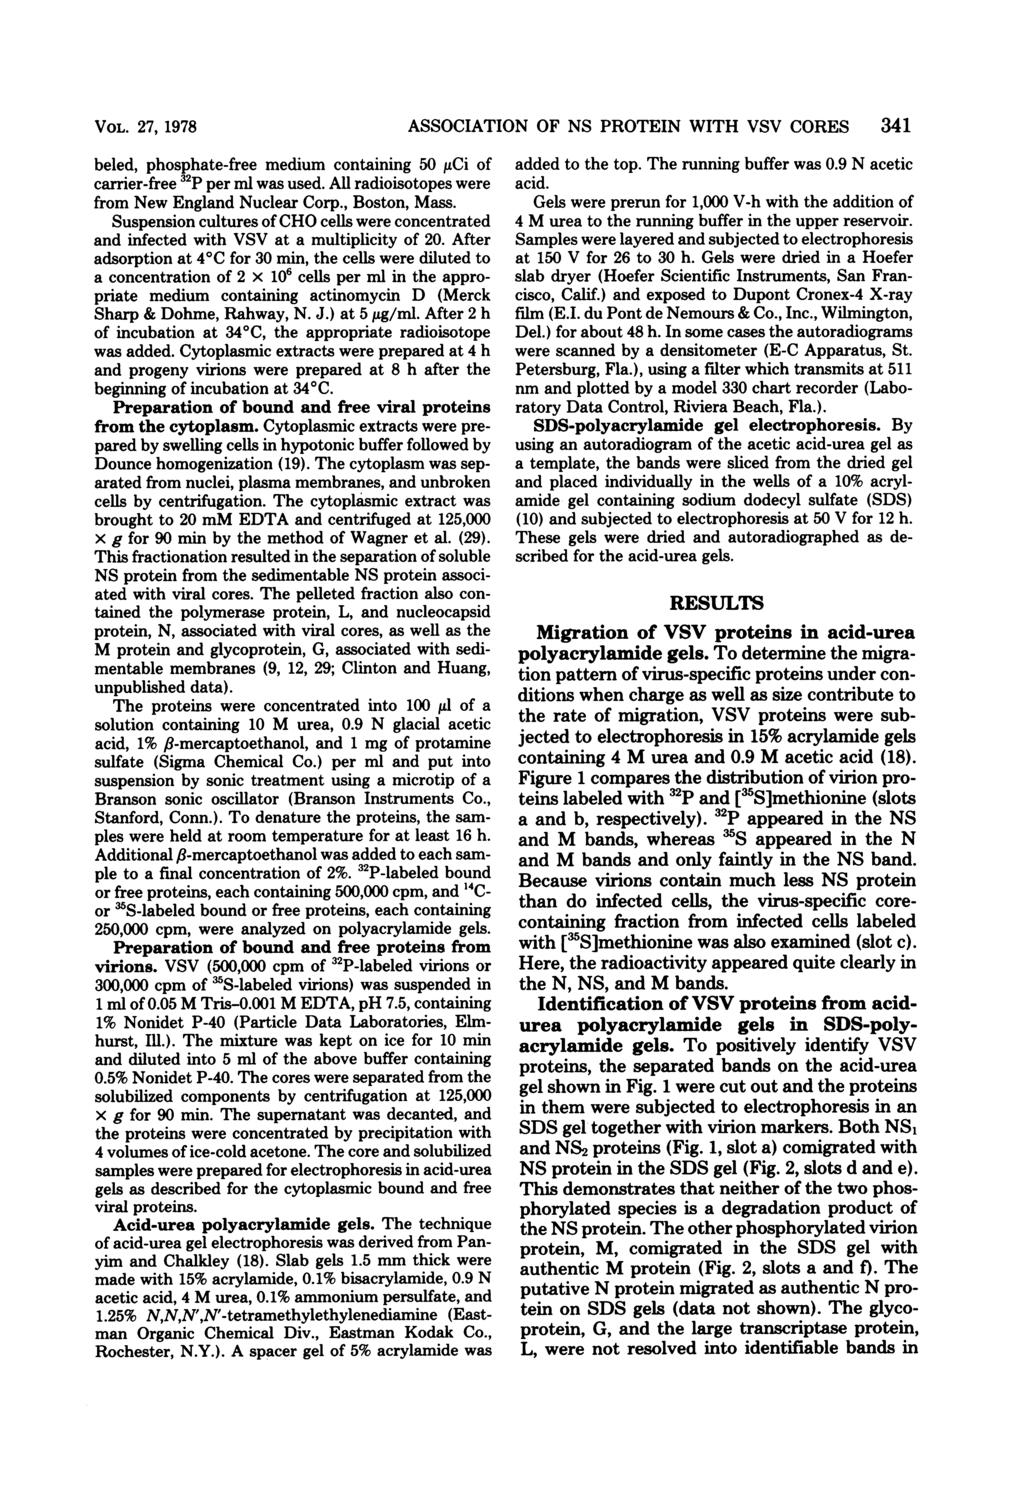 VOL. 27, 1978 beled, phosphate-free medium containing 50,Ci of carrier-free 32P per ml was used. All radioisotopes were from New England Nuclear Corp., Boston, Mass.